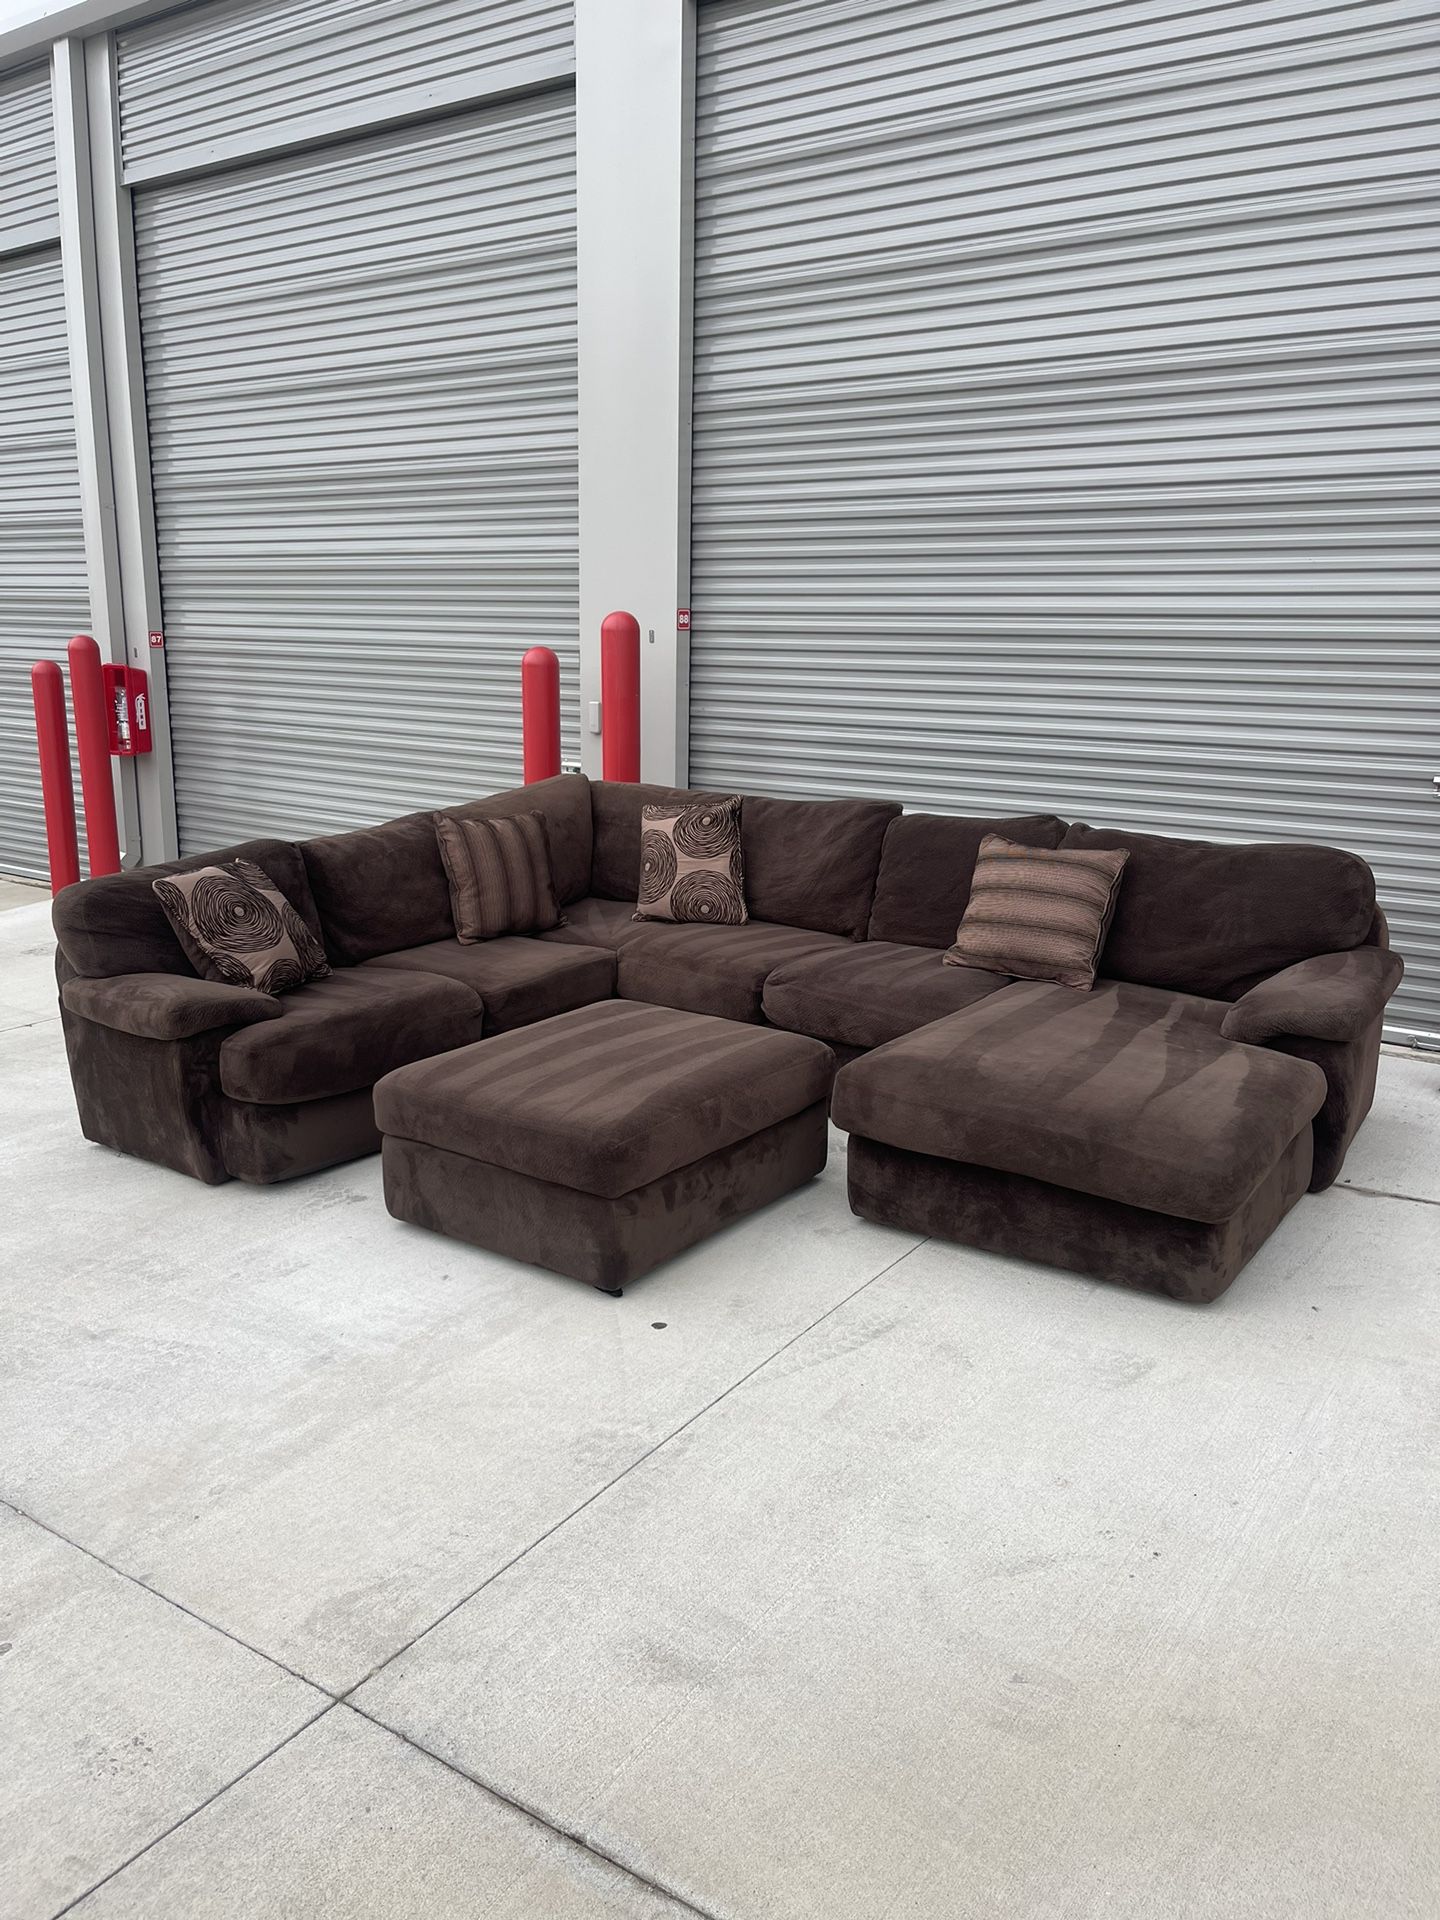 Huge Comfy Sectional Couch